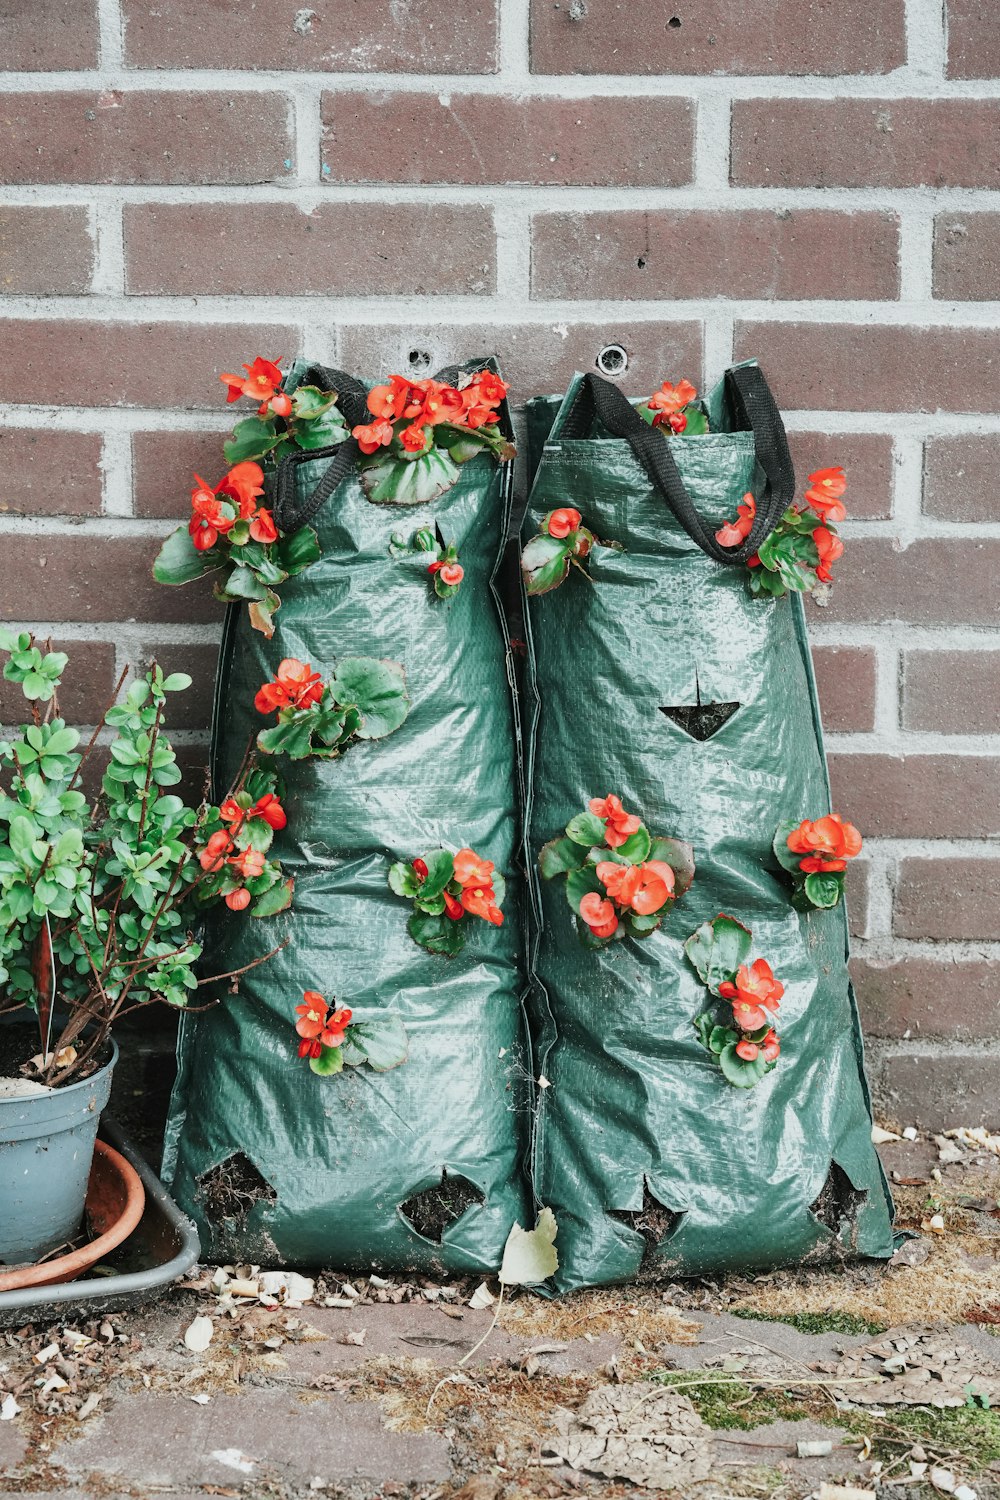 a couple of bags that are next to some flowers